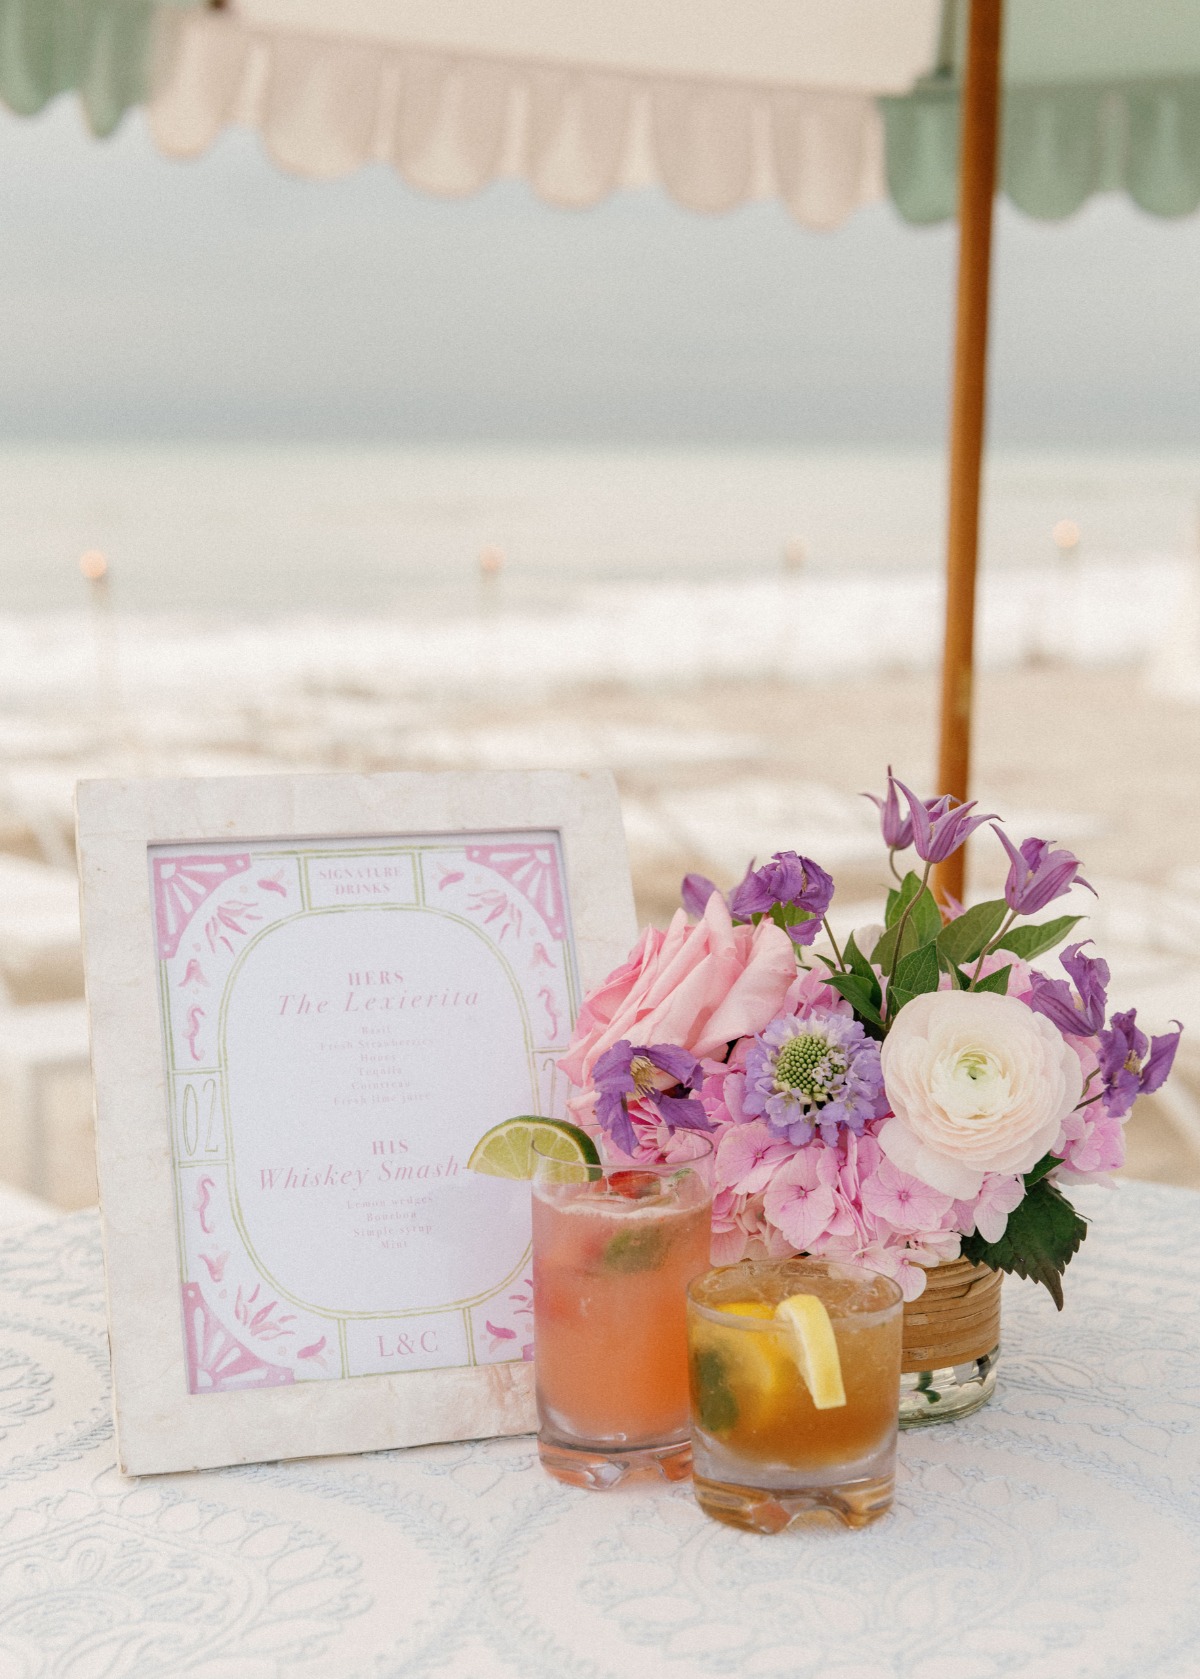 Reception beverage menu with centerpiece and two cocktails